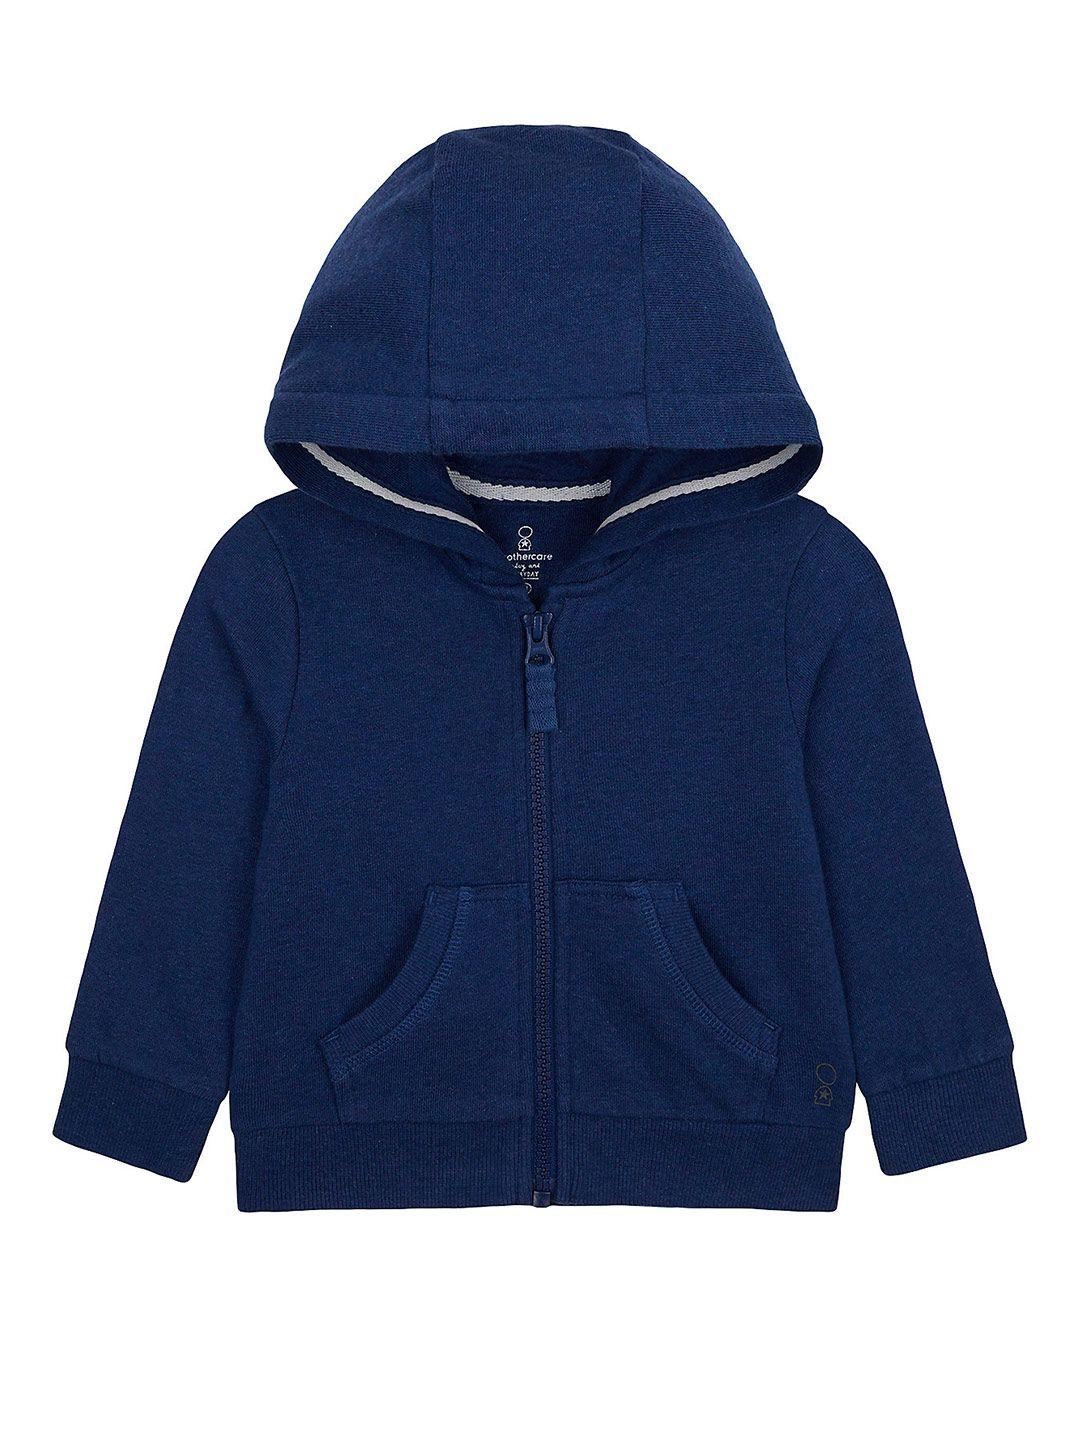 mothercare boys navy blue solid pure cotton hooded sweatshirt